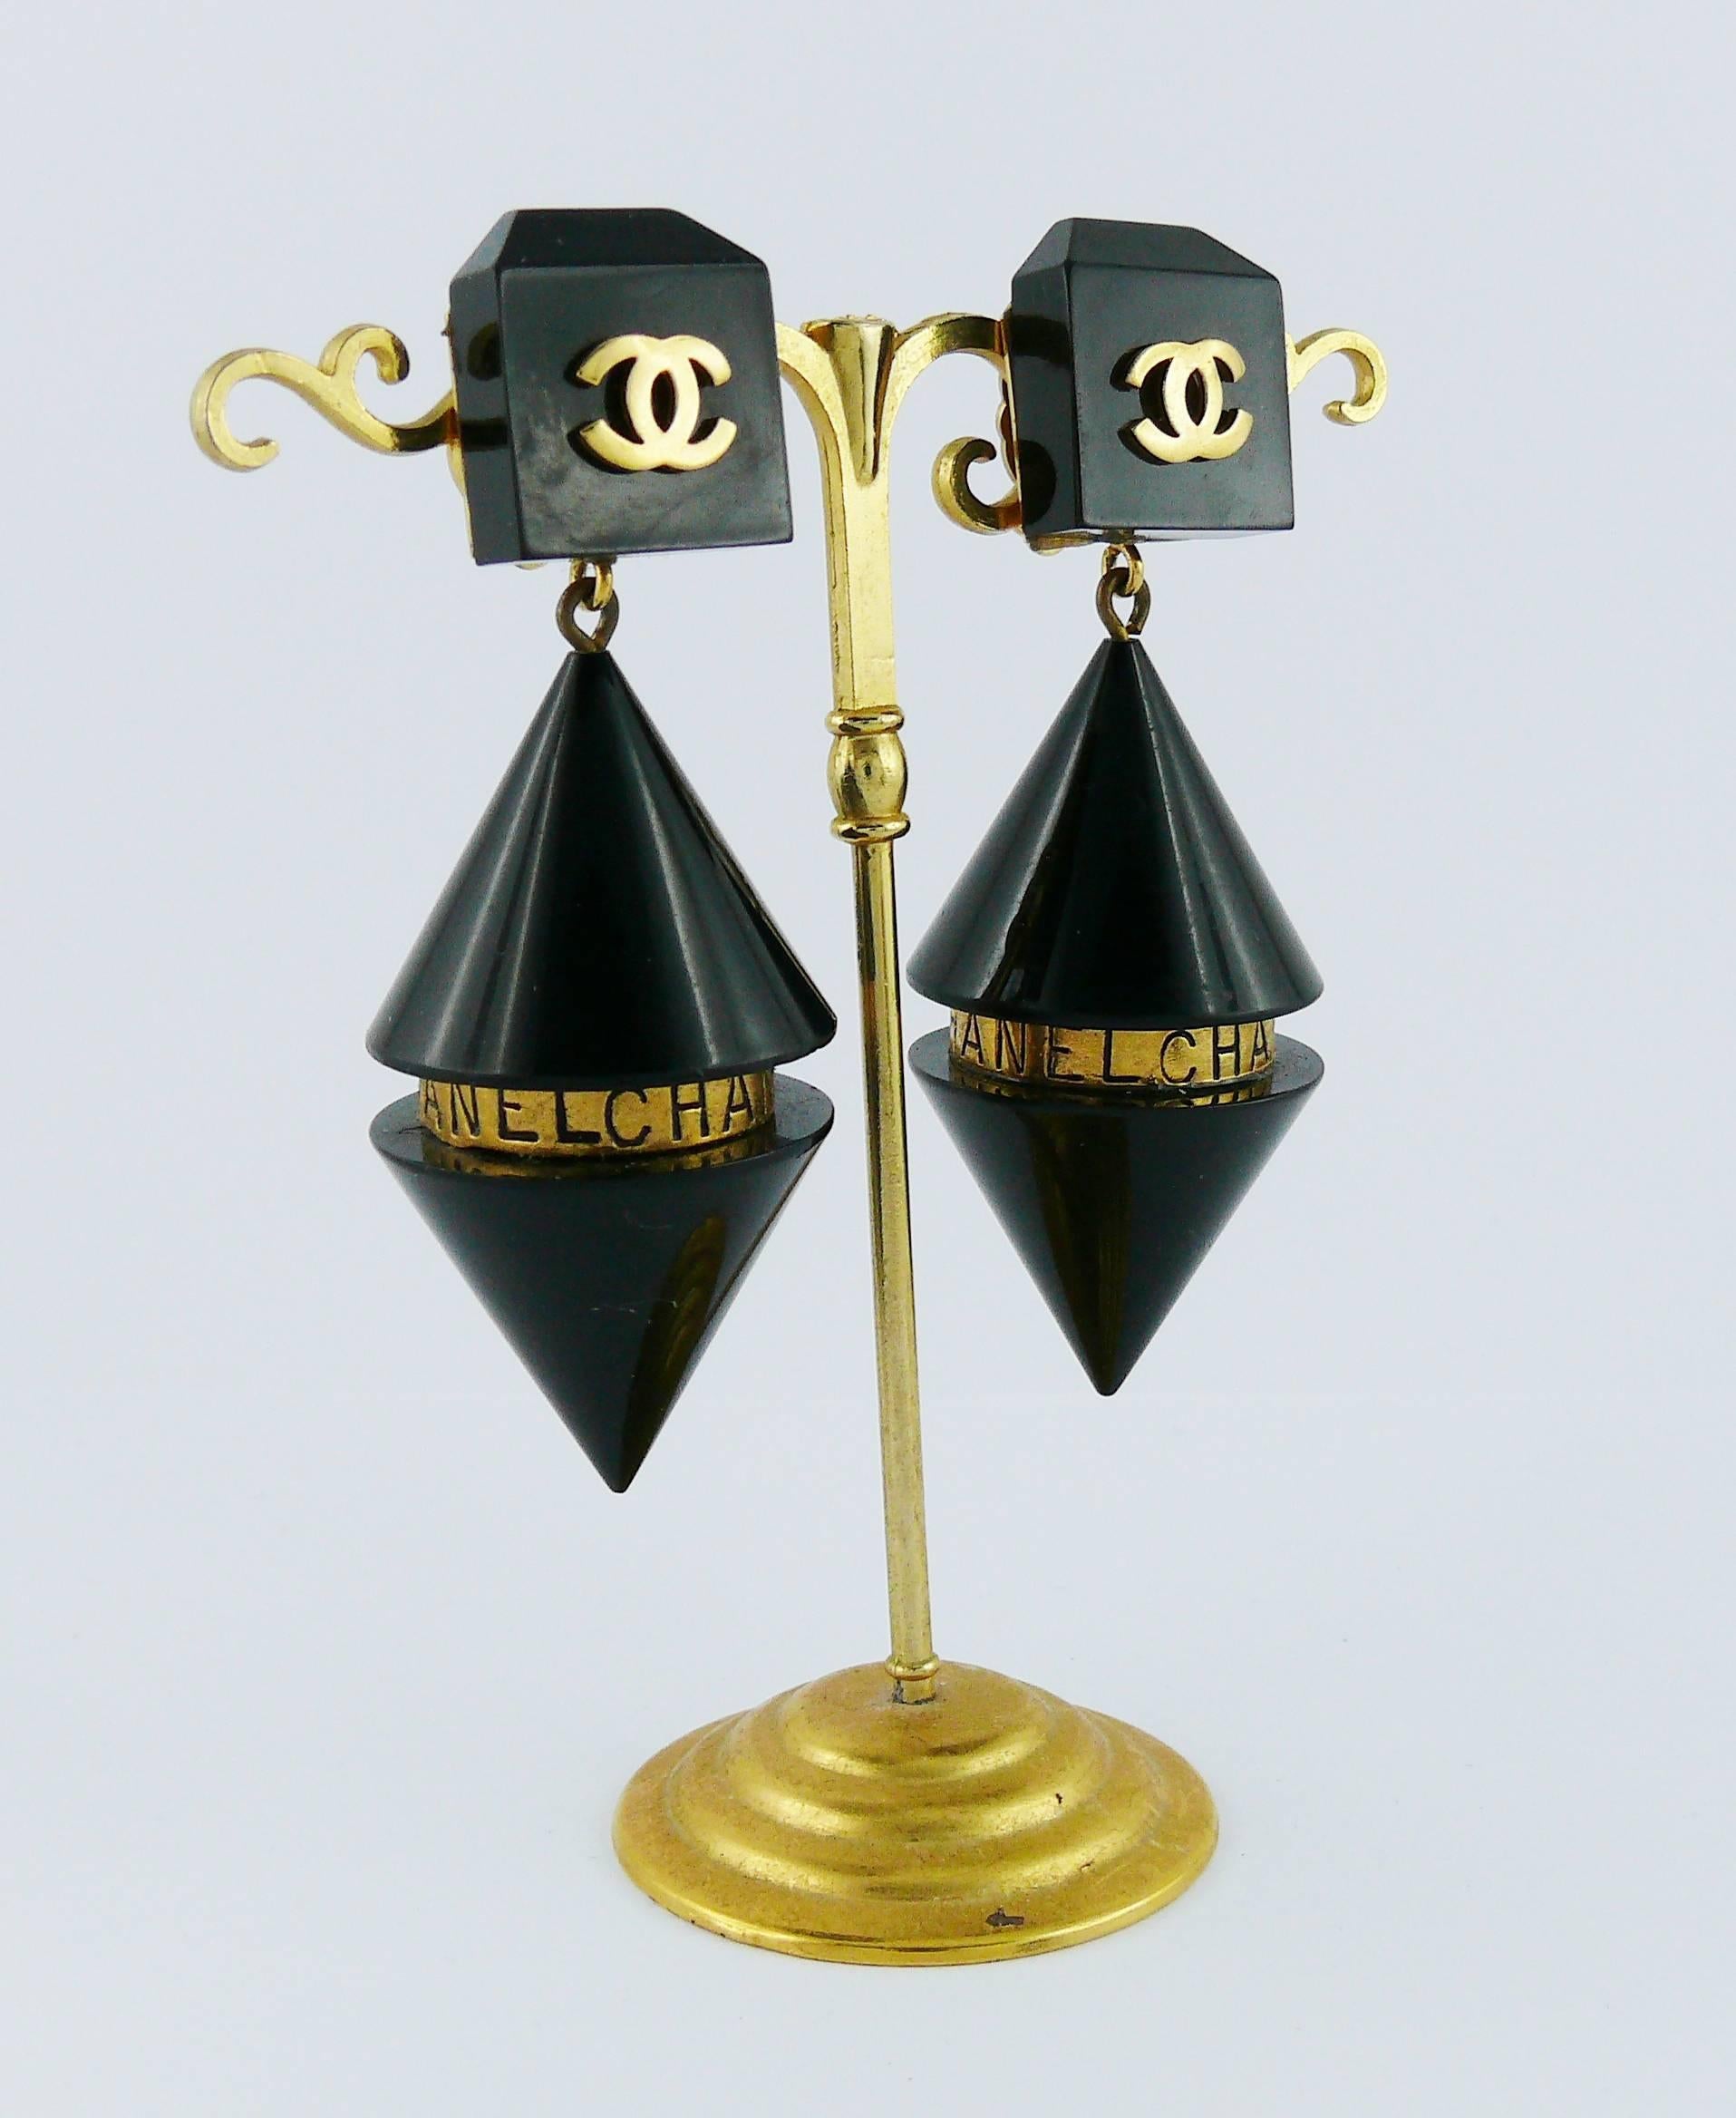 CHANEL vintage rare cylindrical dangling earrings (clip-on) featuring a gold tone band marked CHANEL an CC logo.

Embossed CHANEL.

Indicative measurements : length approx. 7.5 cm (2.95 inches) / max. width approx. 2.3 cm (0.91 inch).

JEWELRY